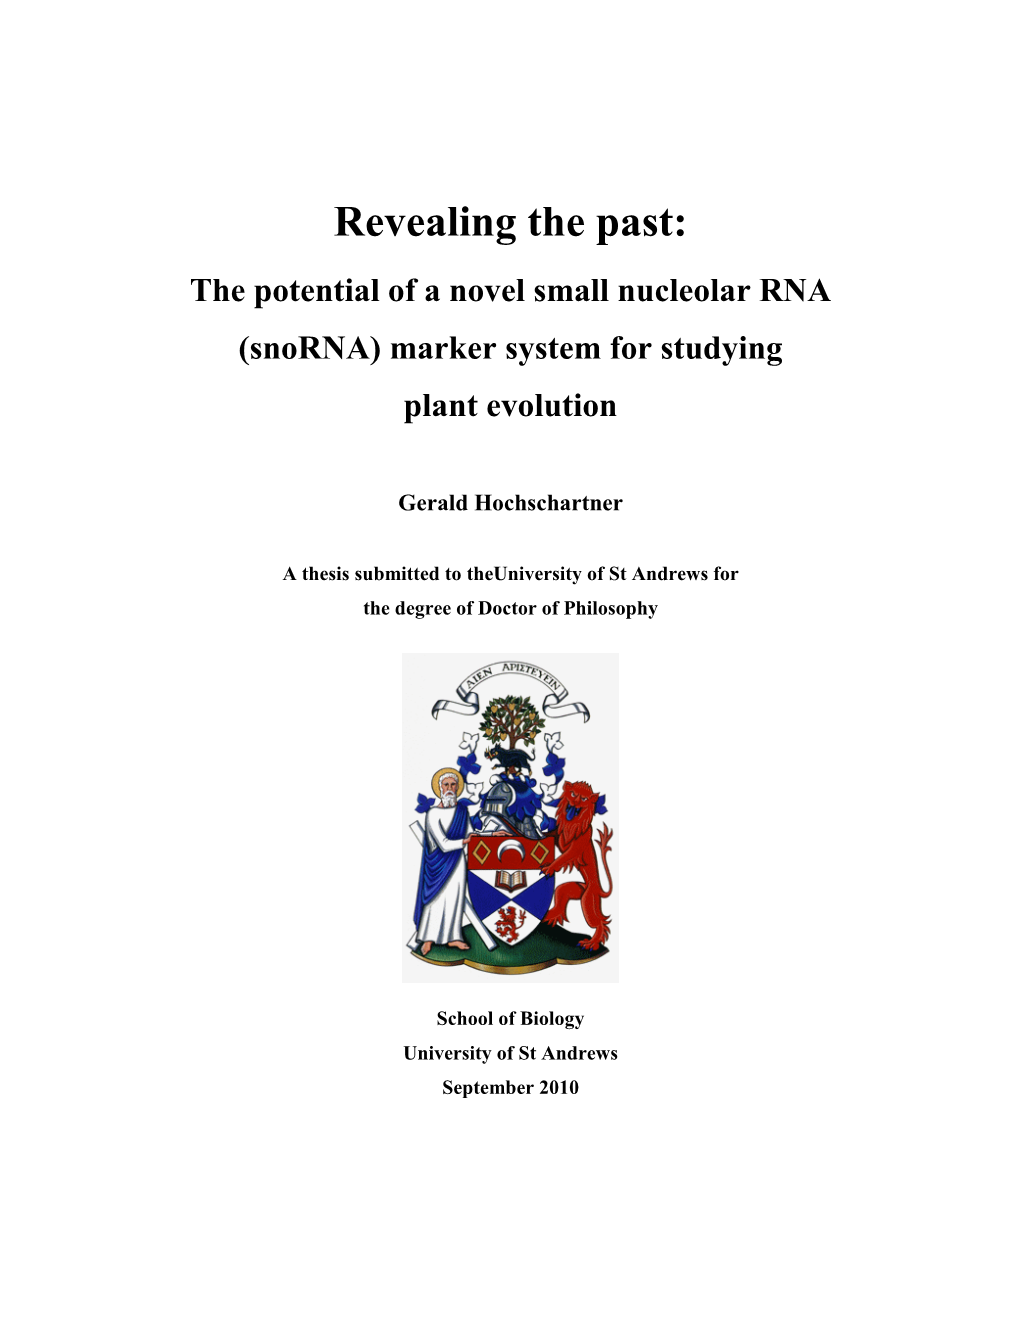 Revealing the Past: the Potential of a Novel Small Nucleolar RNA (Snorna) Marker System for Studying Plant Evolution